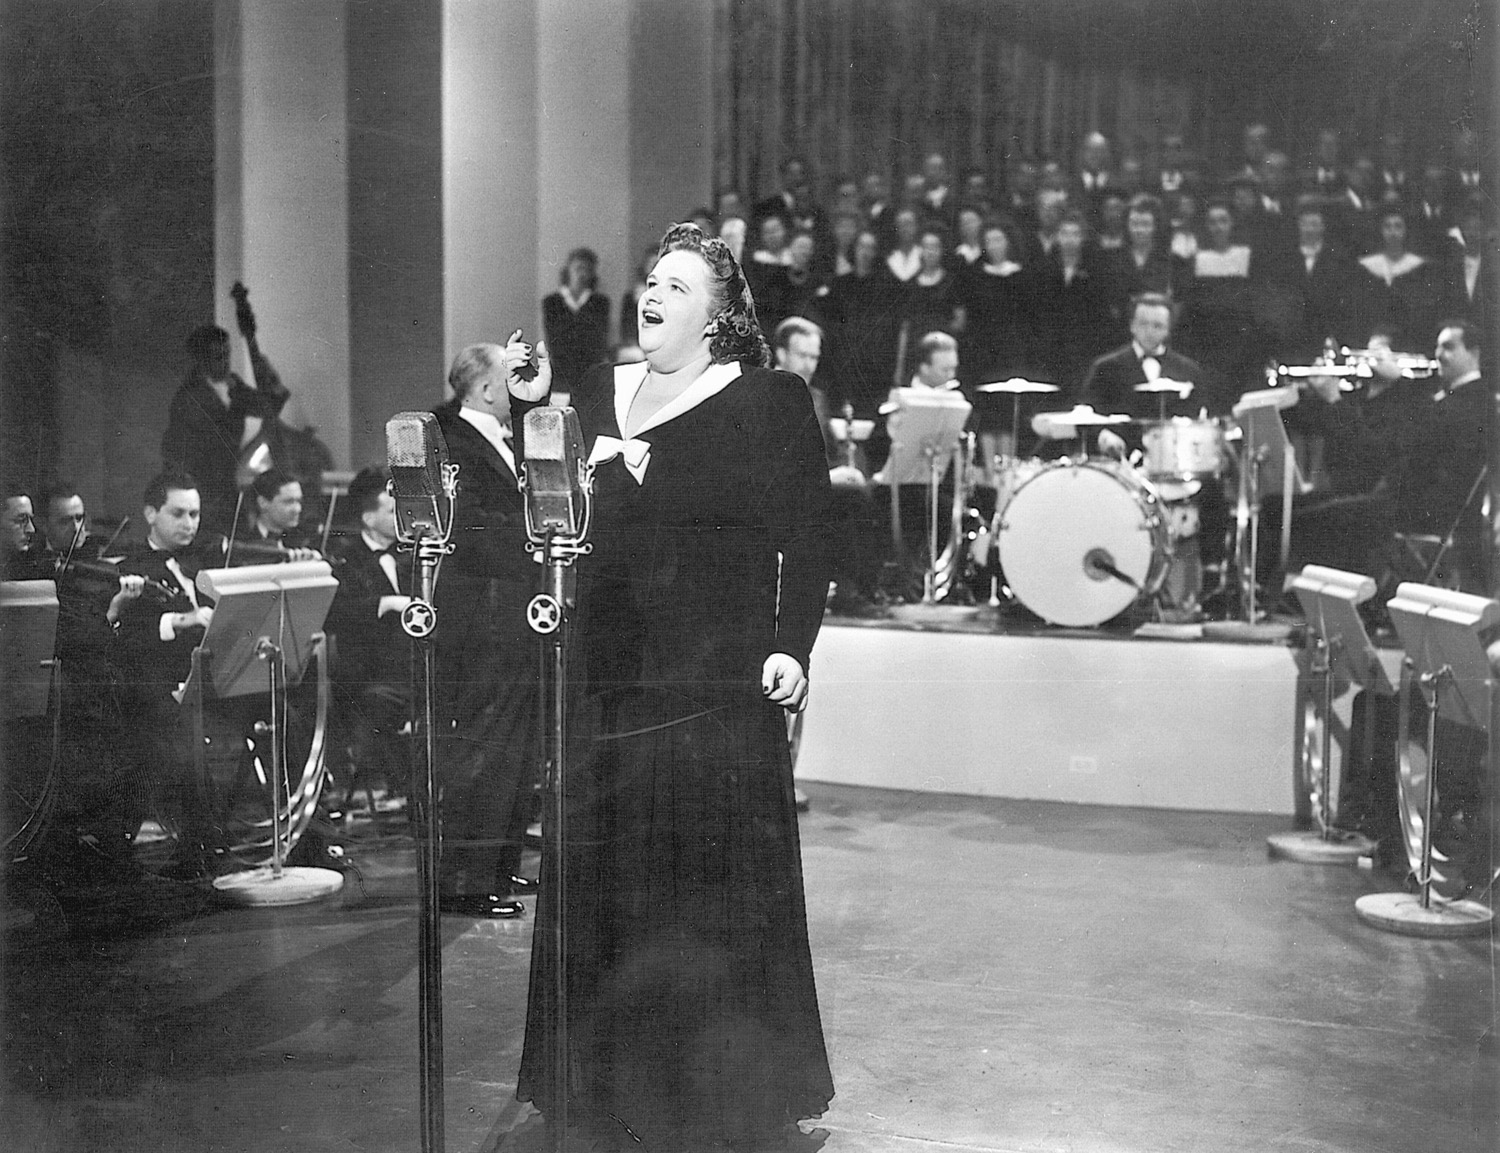 Famed singer Kate Smith sings “God Bless America. The unforgettable music of WWII stirred feelings of patriotism, the sorrow of separation, and romance.